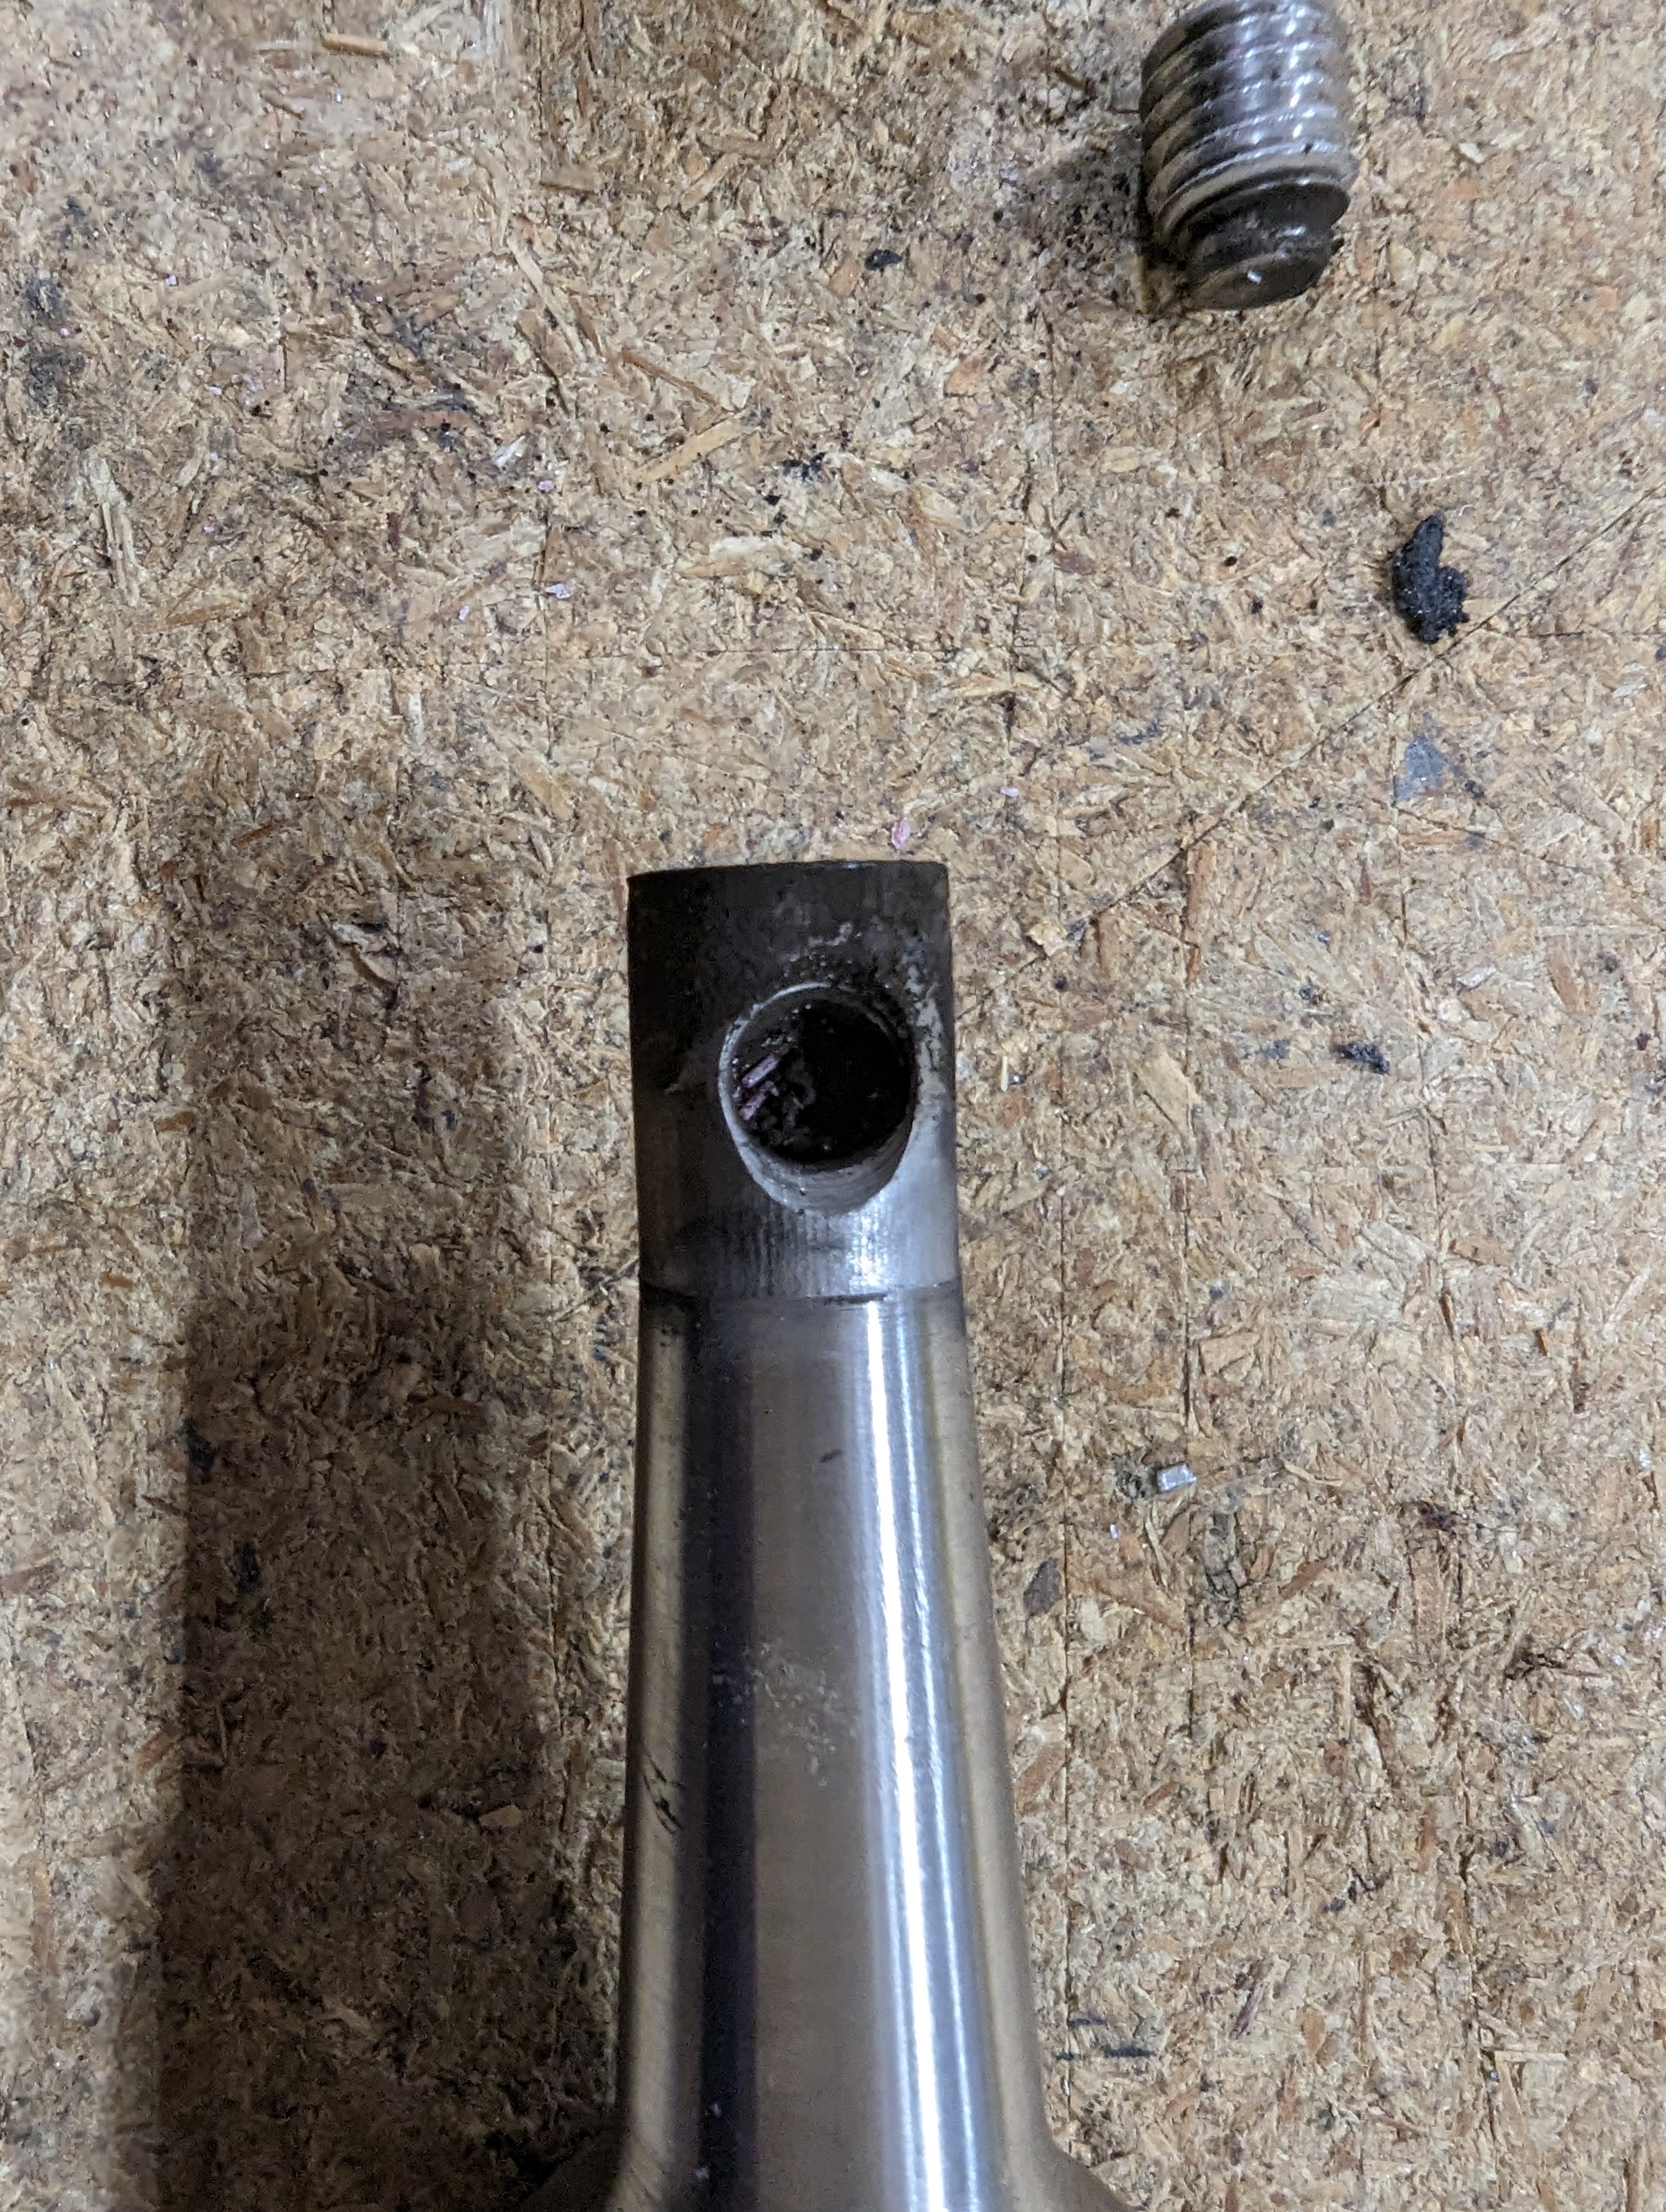 The bottom end of the shifter shaft, covered in a fine steel dust